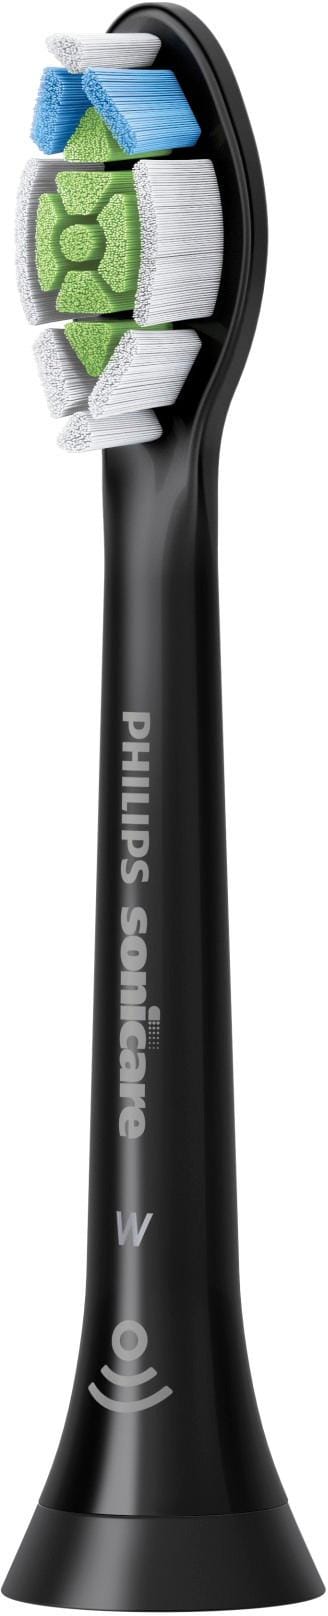 Philips Sonicare - DiamondClean Replacement Toothbrush Heads (4-pack) - Black_1